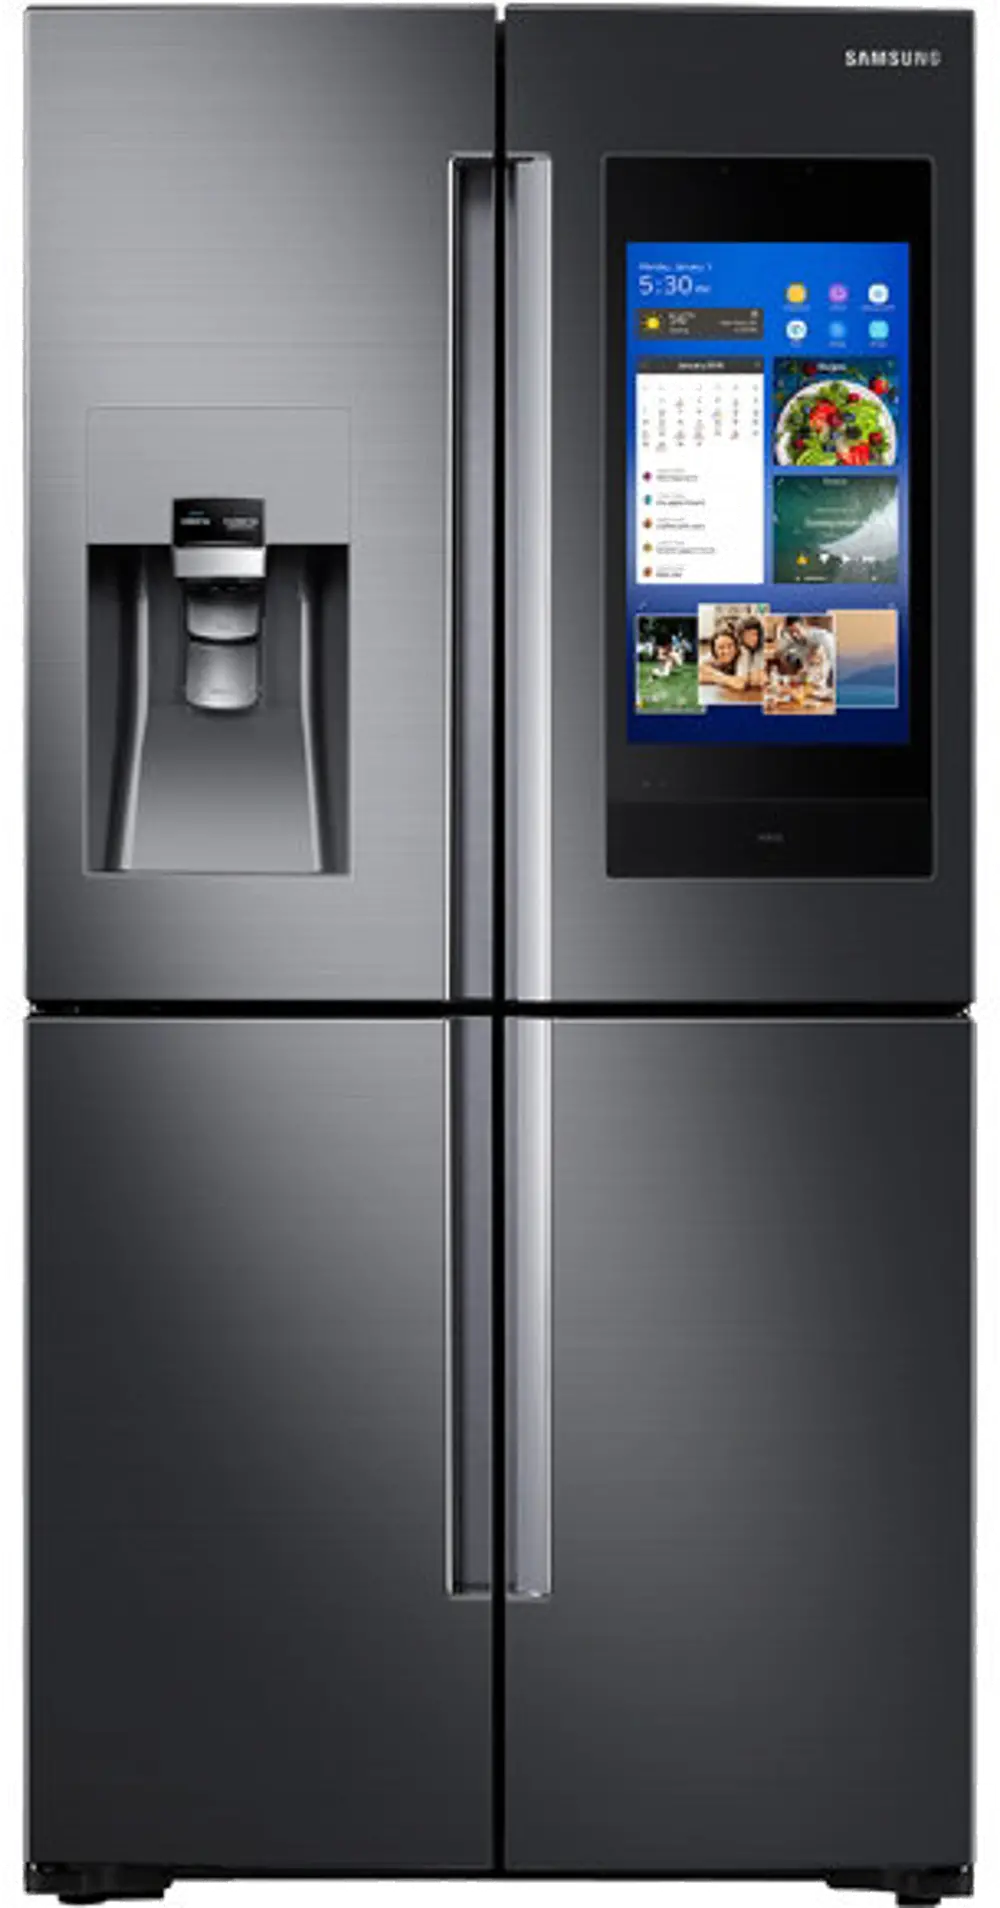 RF22N9781SG Samsung Counter Depth Family Hub Smart Refrigerator with Flex Zone - 22 cu. ft., 36 Inch Black Stainless Steel-1